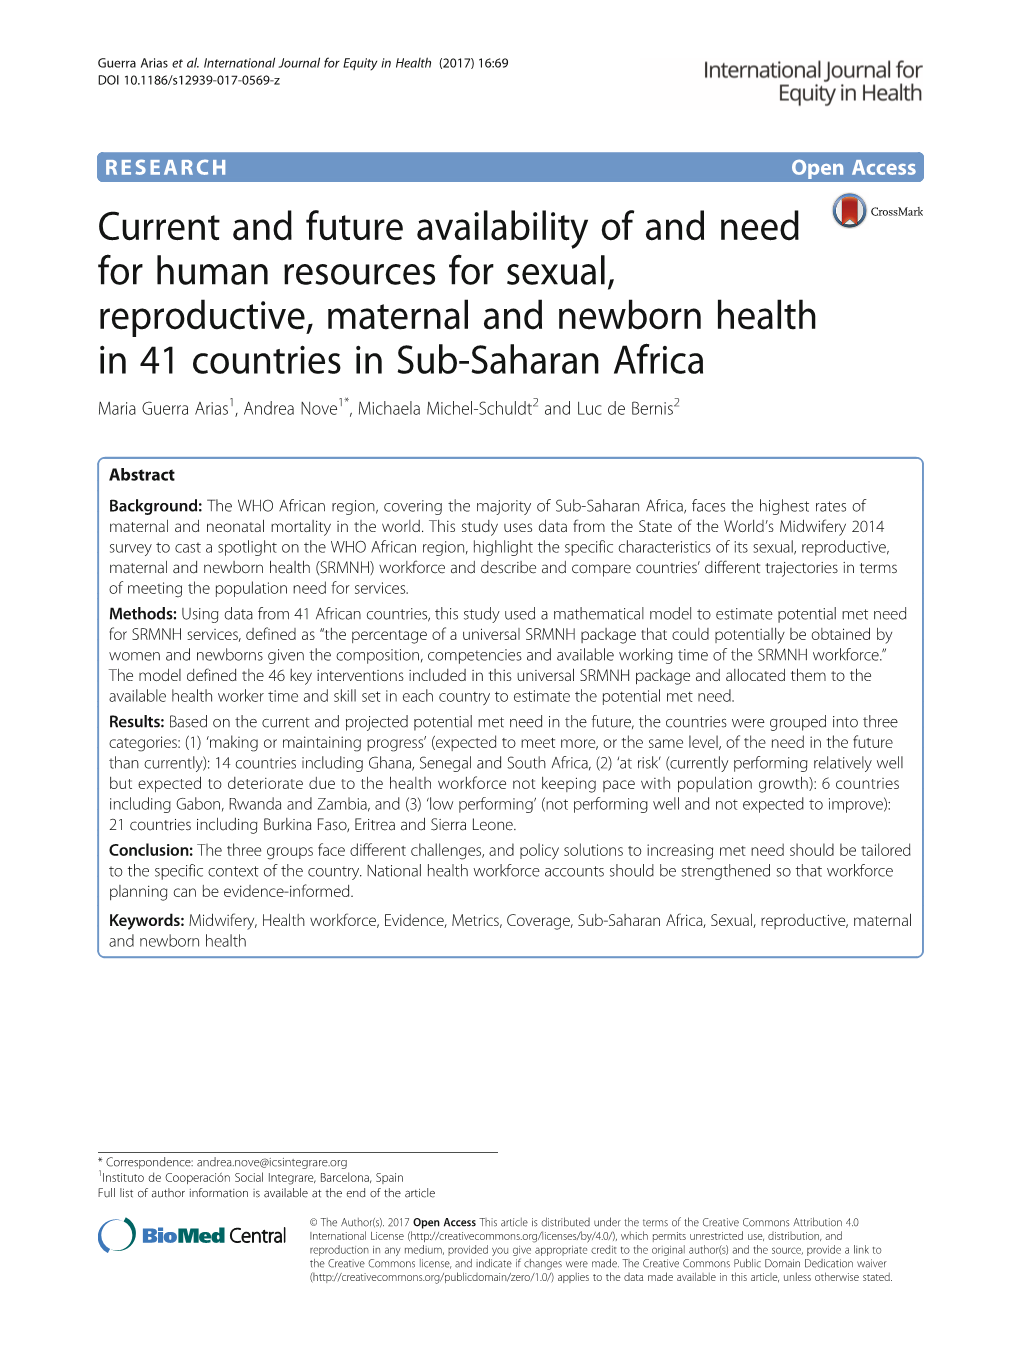 Current and Future Availability of and Need for Human Resources for Sexual, Reproductive, Maternal and Newborn Health in 41 Coun